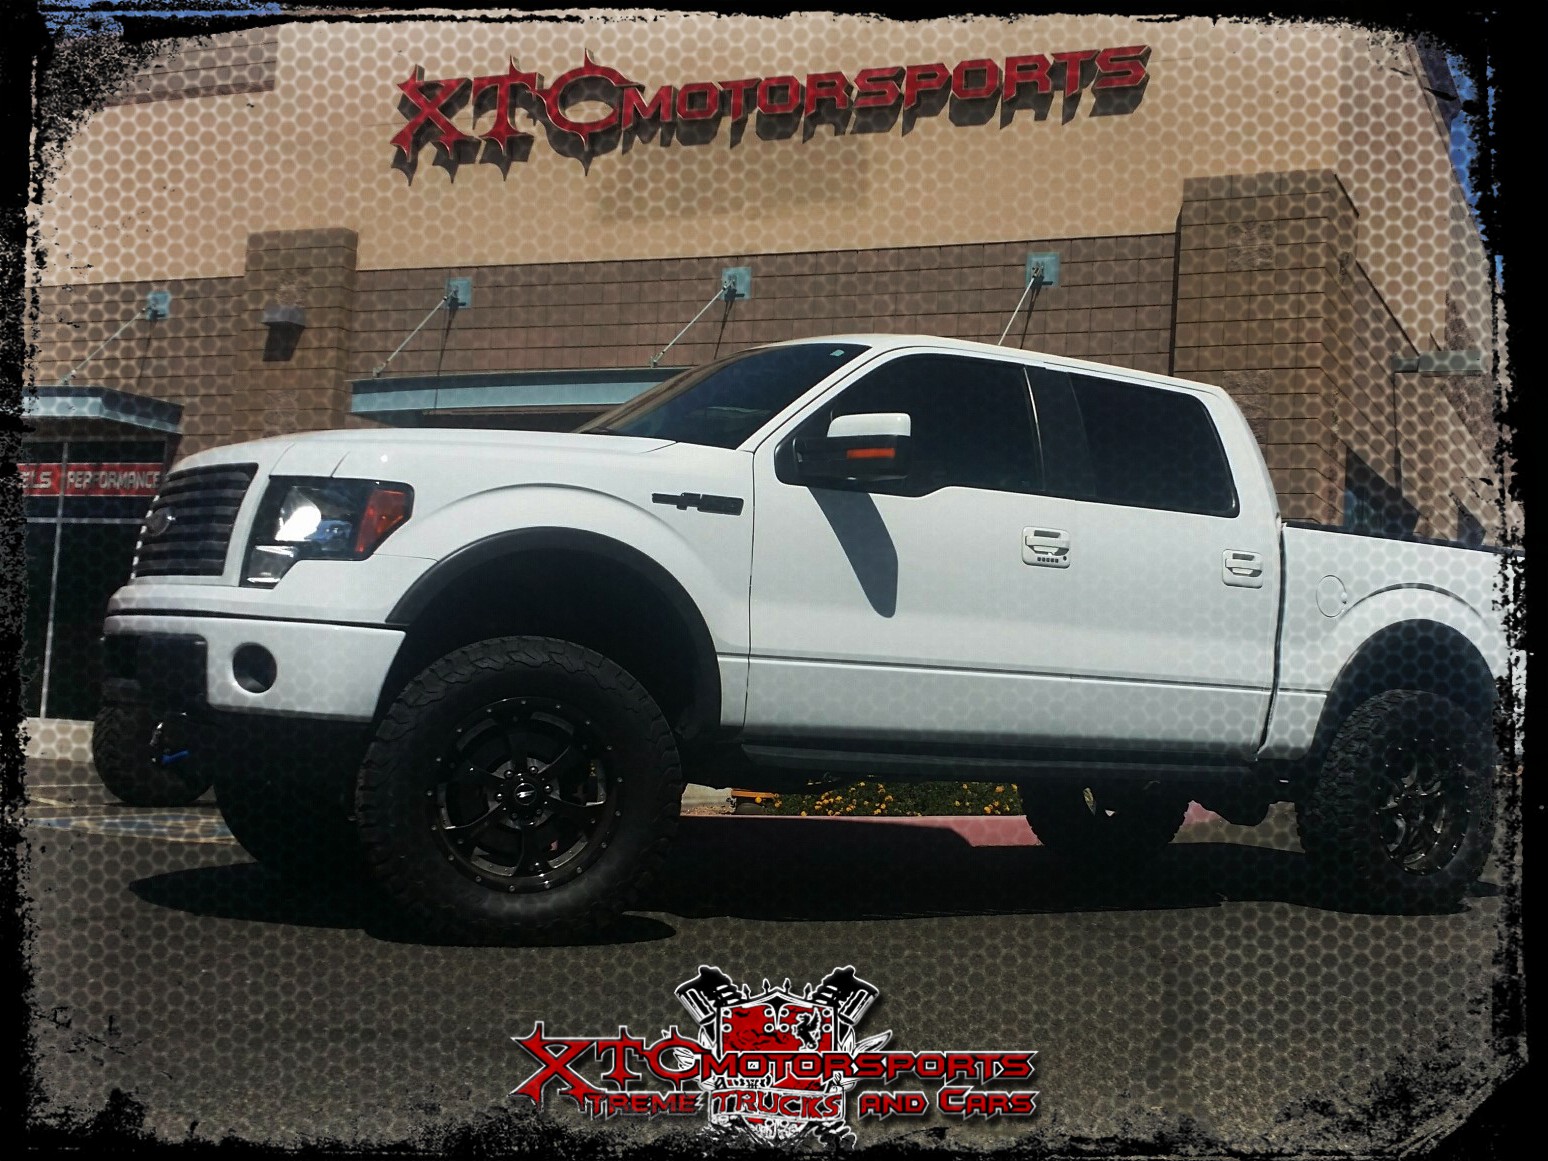 It's been a while since we did this truck and never got any photos, well we had it back in the shop today so we grabbed some shots of Ryan's F150 that we put a BDS Suspension 6" Lift on with ICON Vehicle Dynamics 2.5 Front Coilovers & rear 2.0 shocks, Maxtrac Suspension 2" rear blocks, 325/60R20 BFGoodrich Tires KO2 tires on these BMF wheels he already sported on this truck.